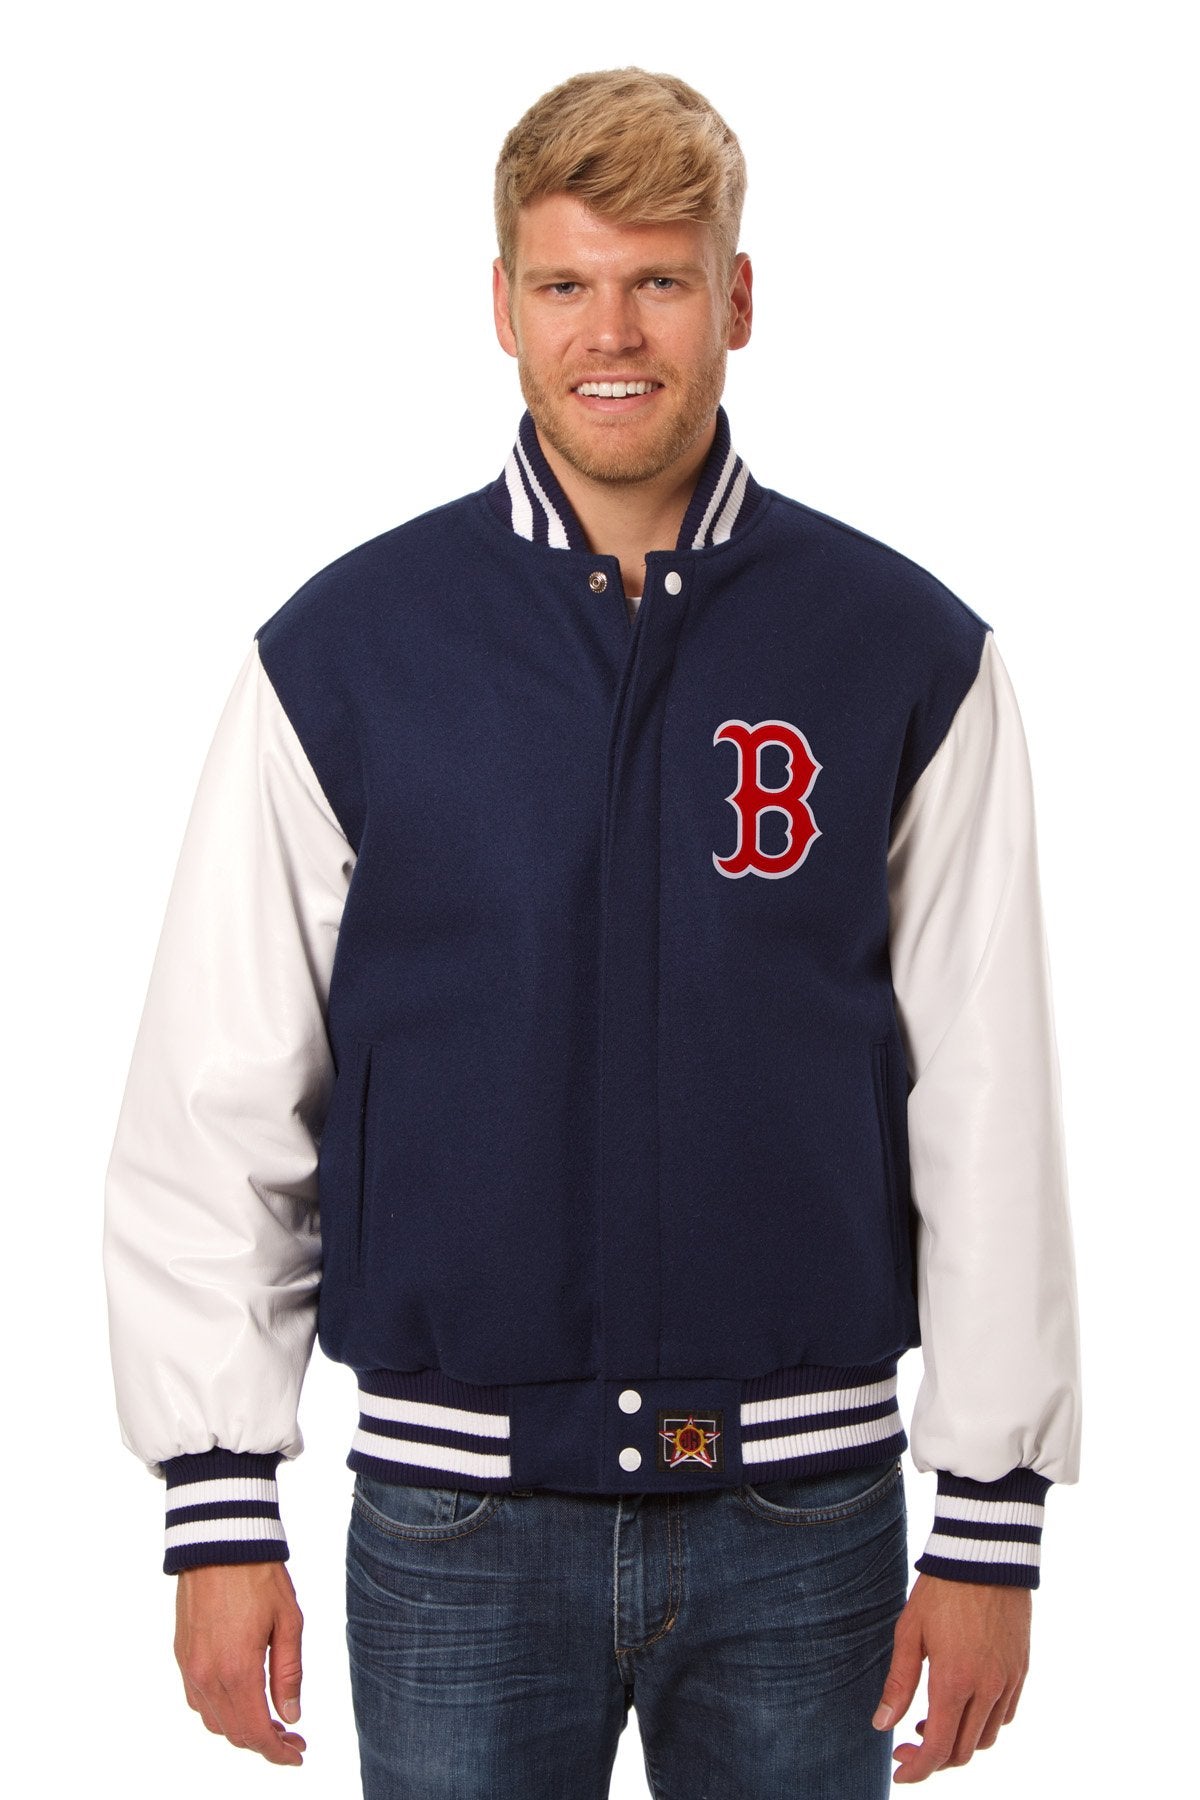 Boston Red Sox Leather Jacket